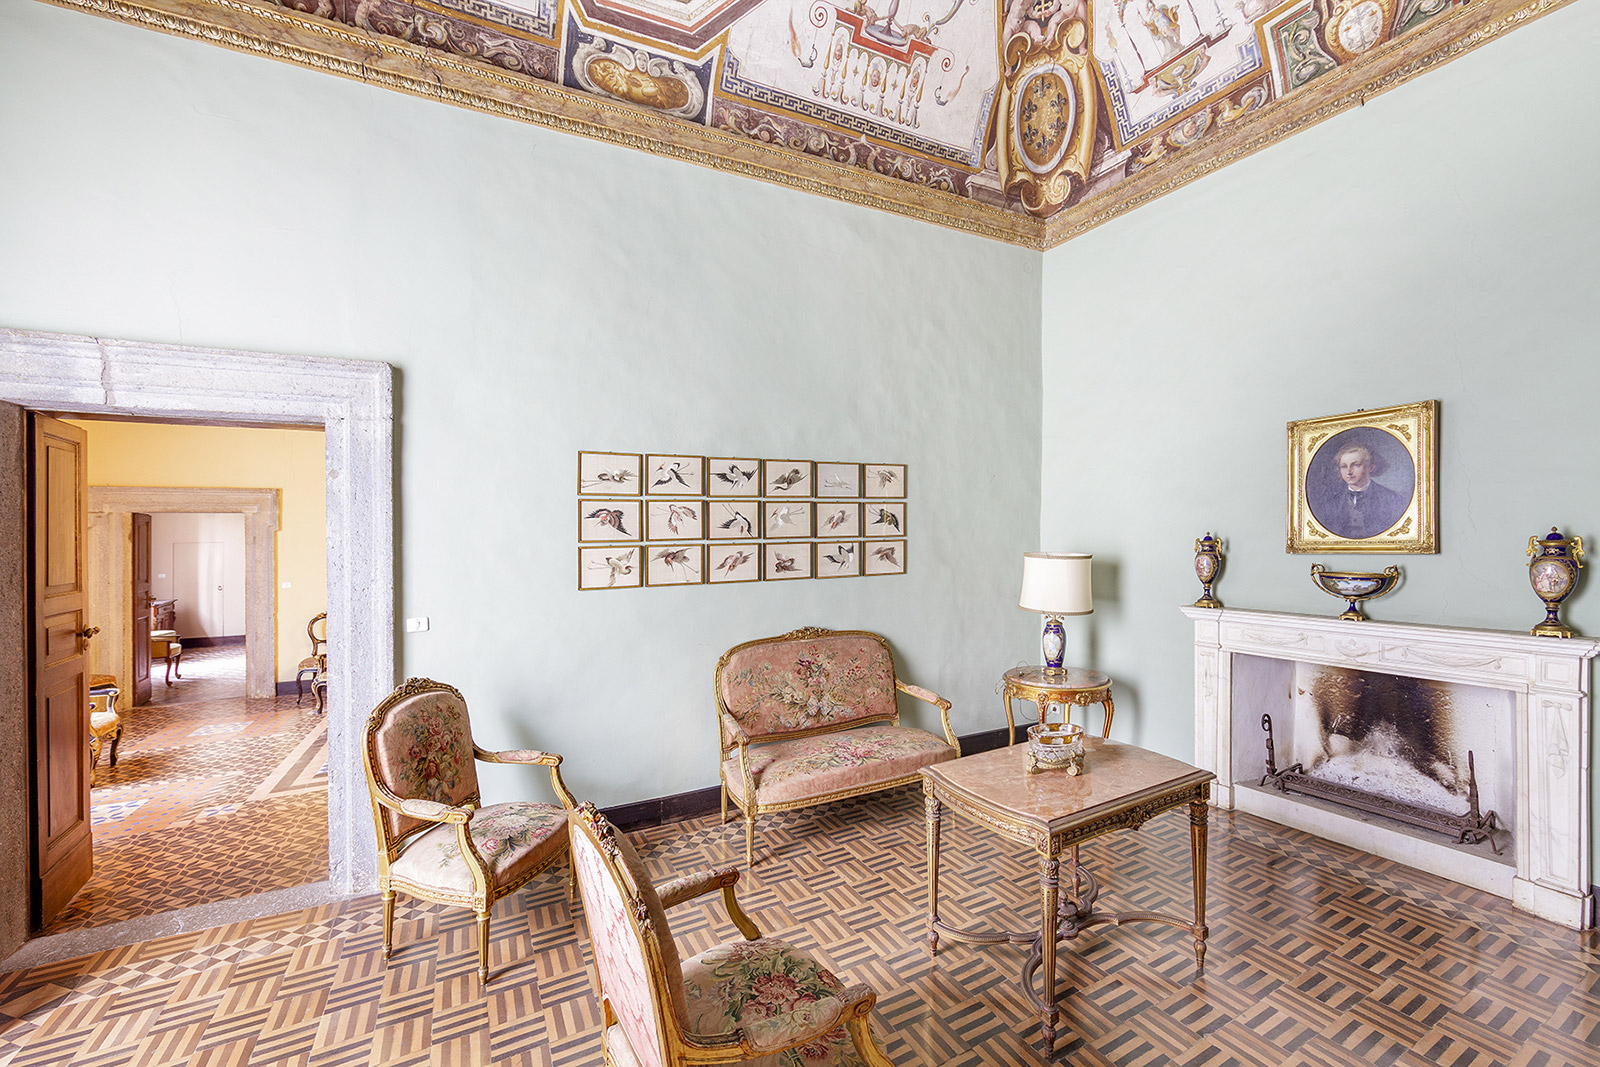 Frescoed palazzo hits the market for €2.5m in Acquapendente